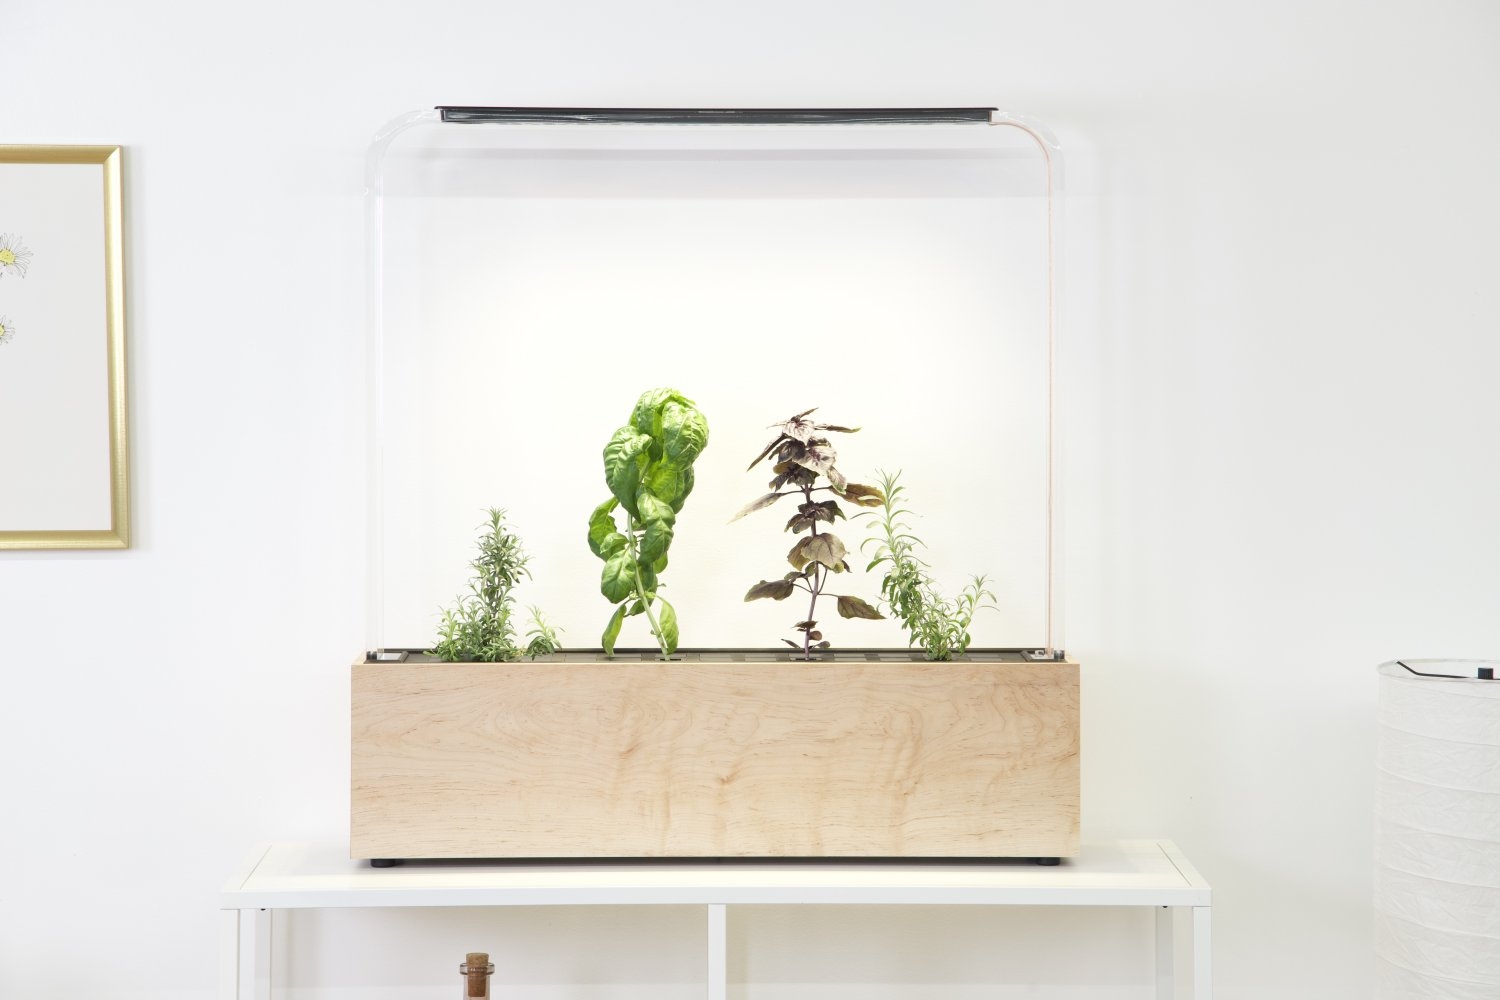 A solid 20 mm-thick hardwood case houses the world's most intelligent home garden system, featuring over a dozen integrated sensors and powerful LEDs. 